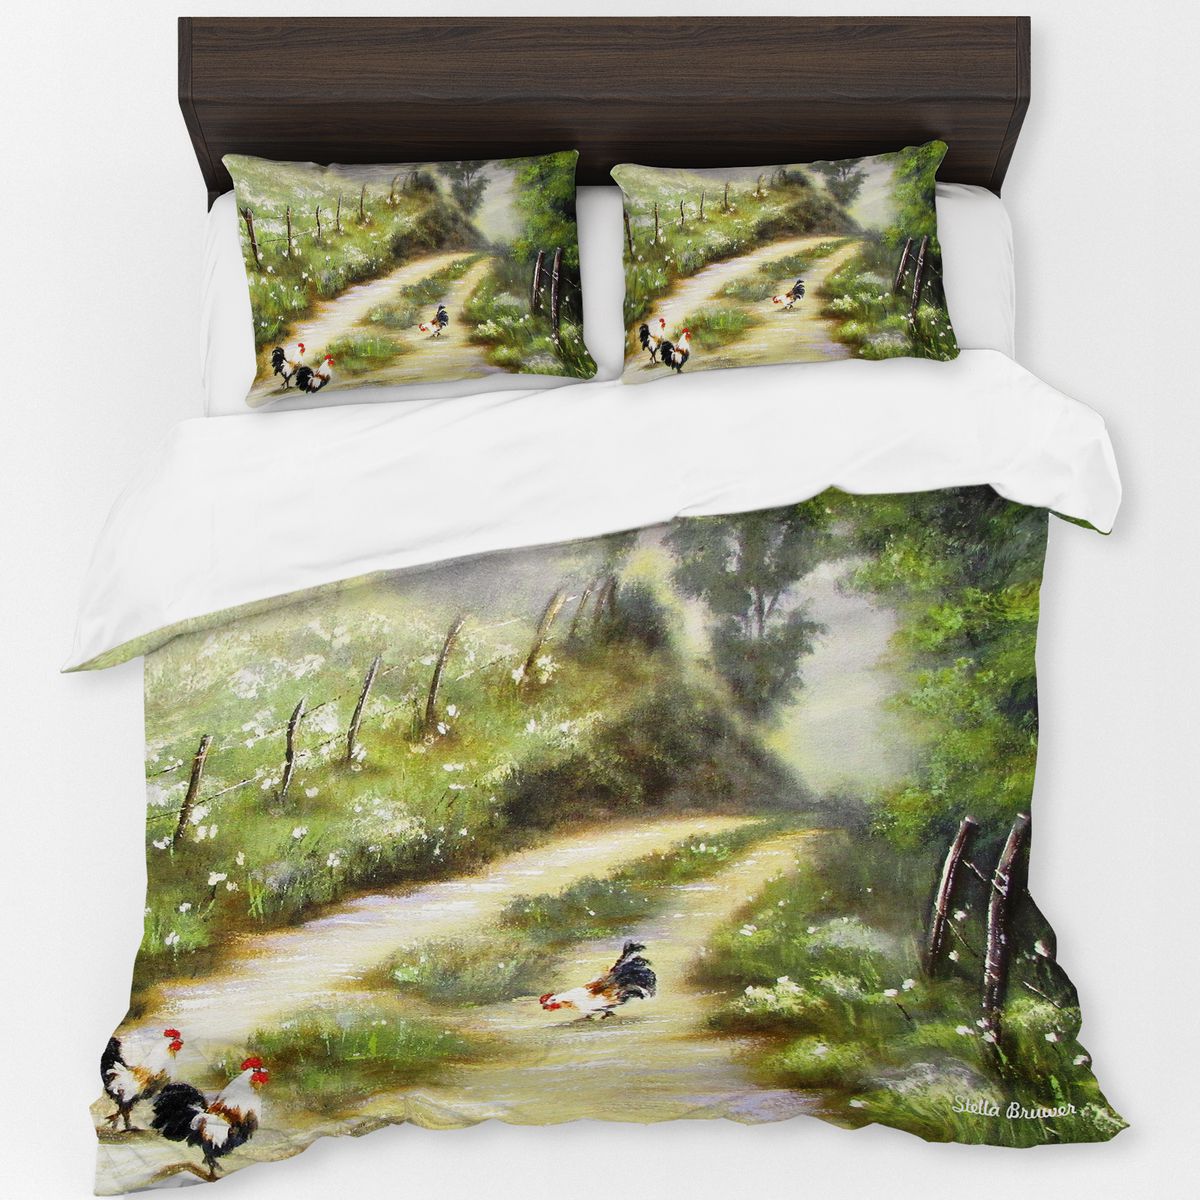 Chickens On The Road By Stella Bruwer Duvet Cover Set